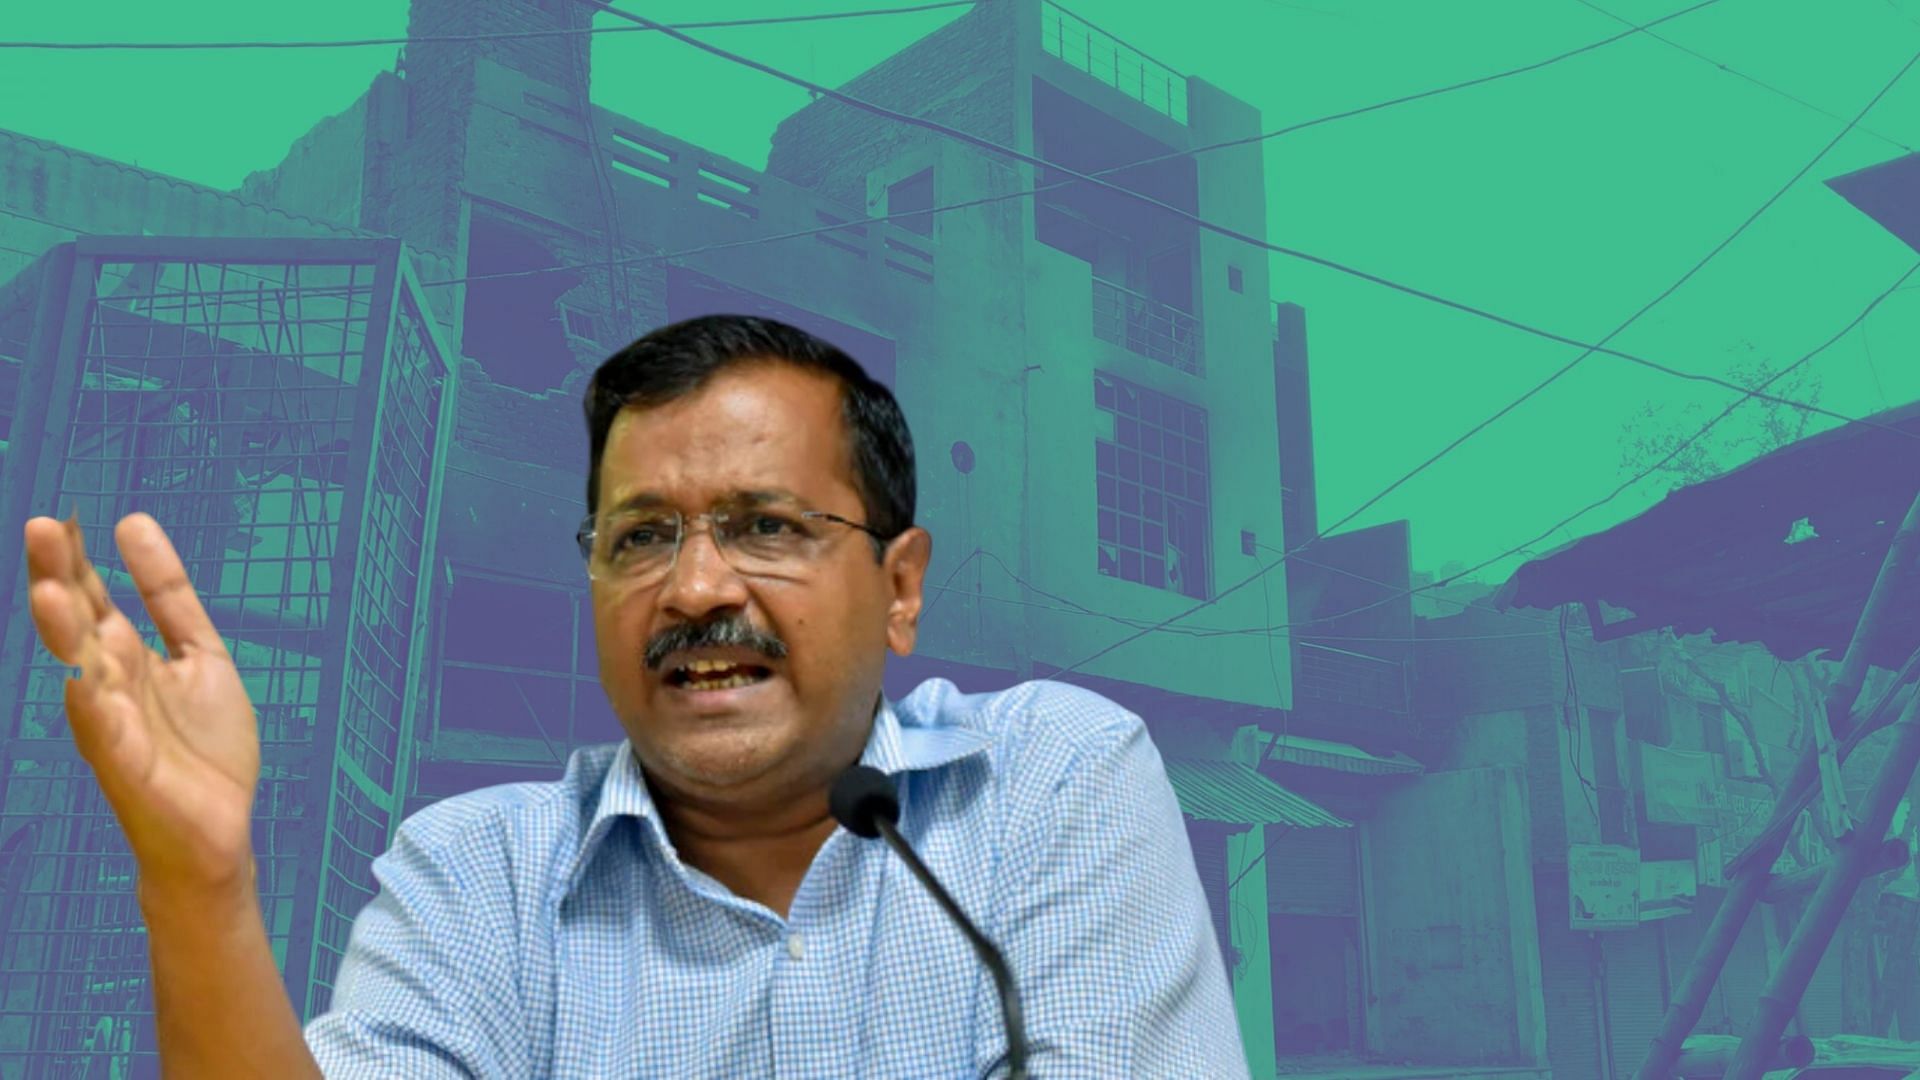 Taking to Twitter, Kejriwal said he is personally trying to ensure that relief reaches each person in need.